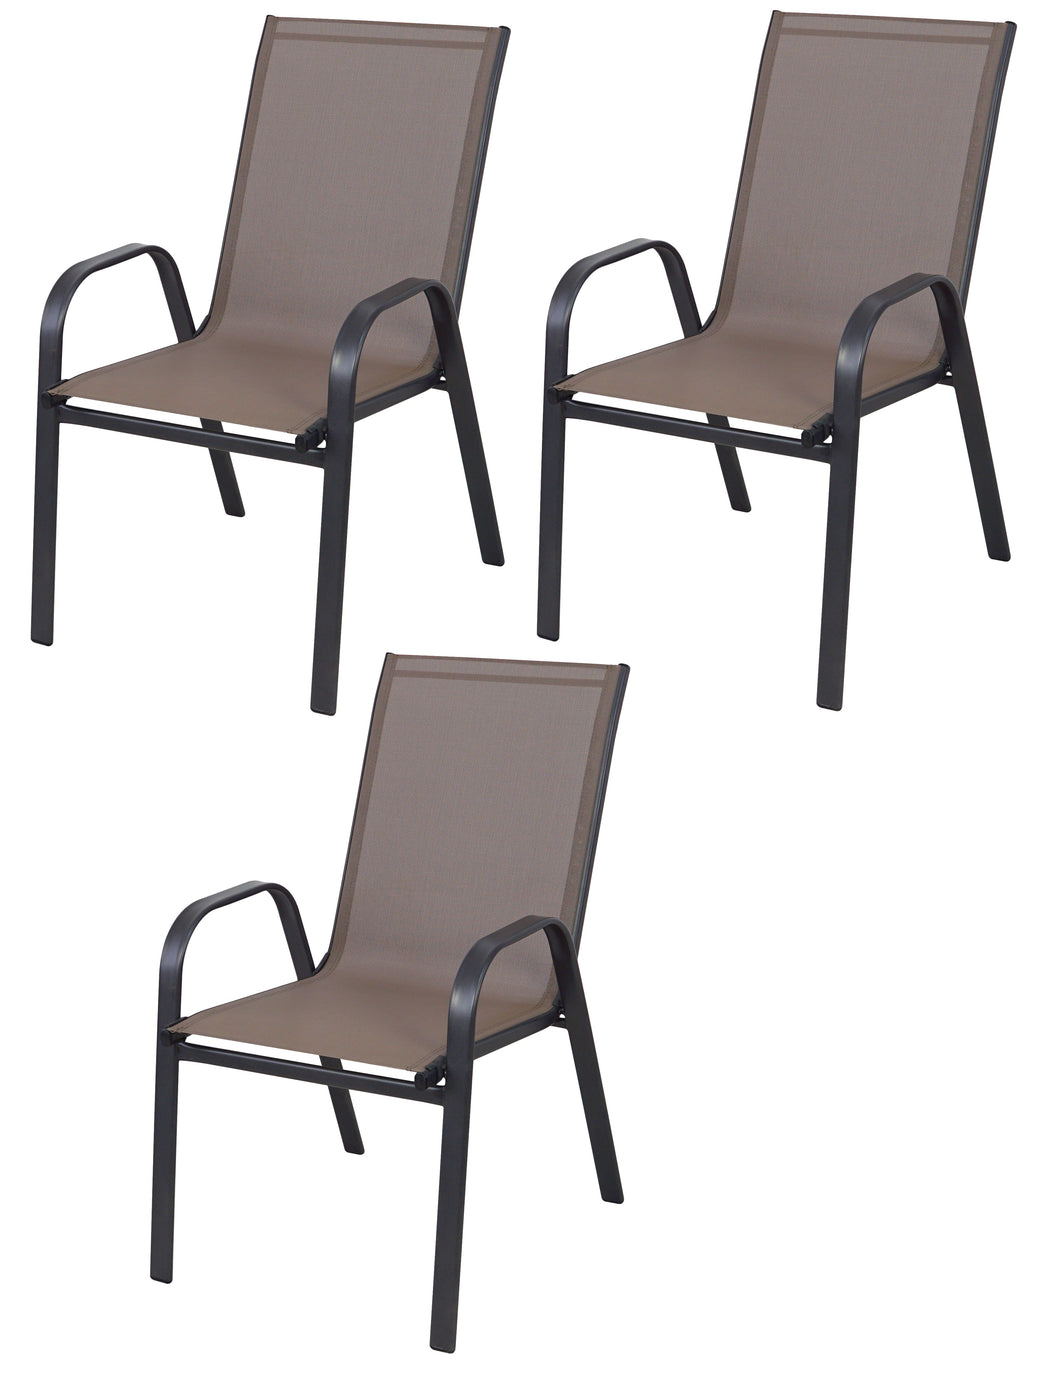 BTExpert Indoor Outdoor 3 - Set of Three Brown Restaurant Flexible Sling Stack Chairs, patio Metal Frame Chair